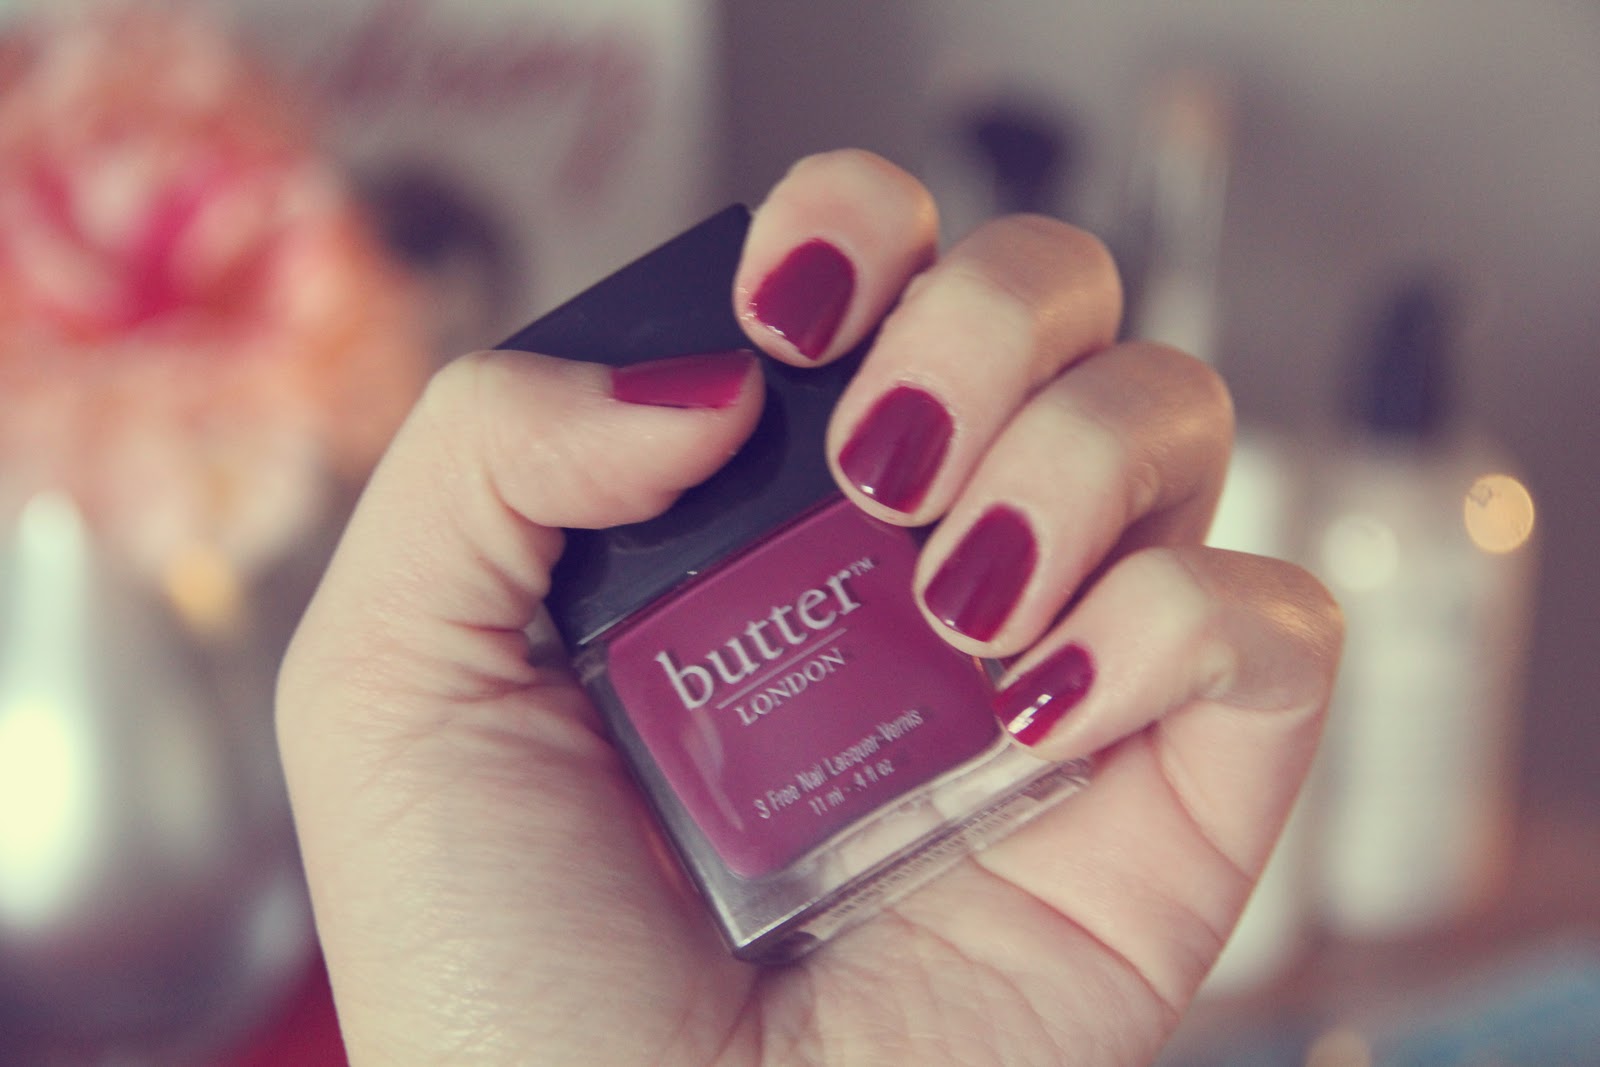 9. Butter London Nail Lacquer in "Queen Vic" - wide 3